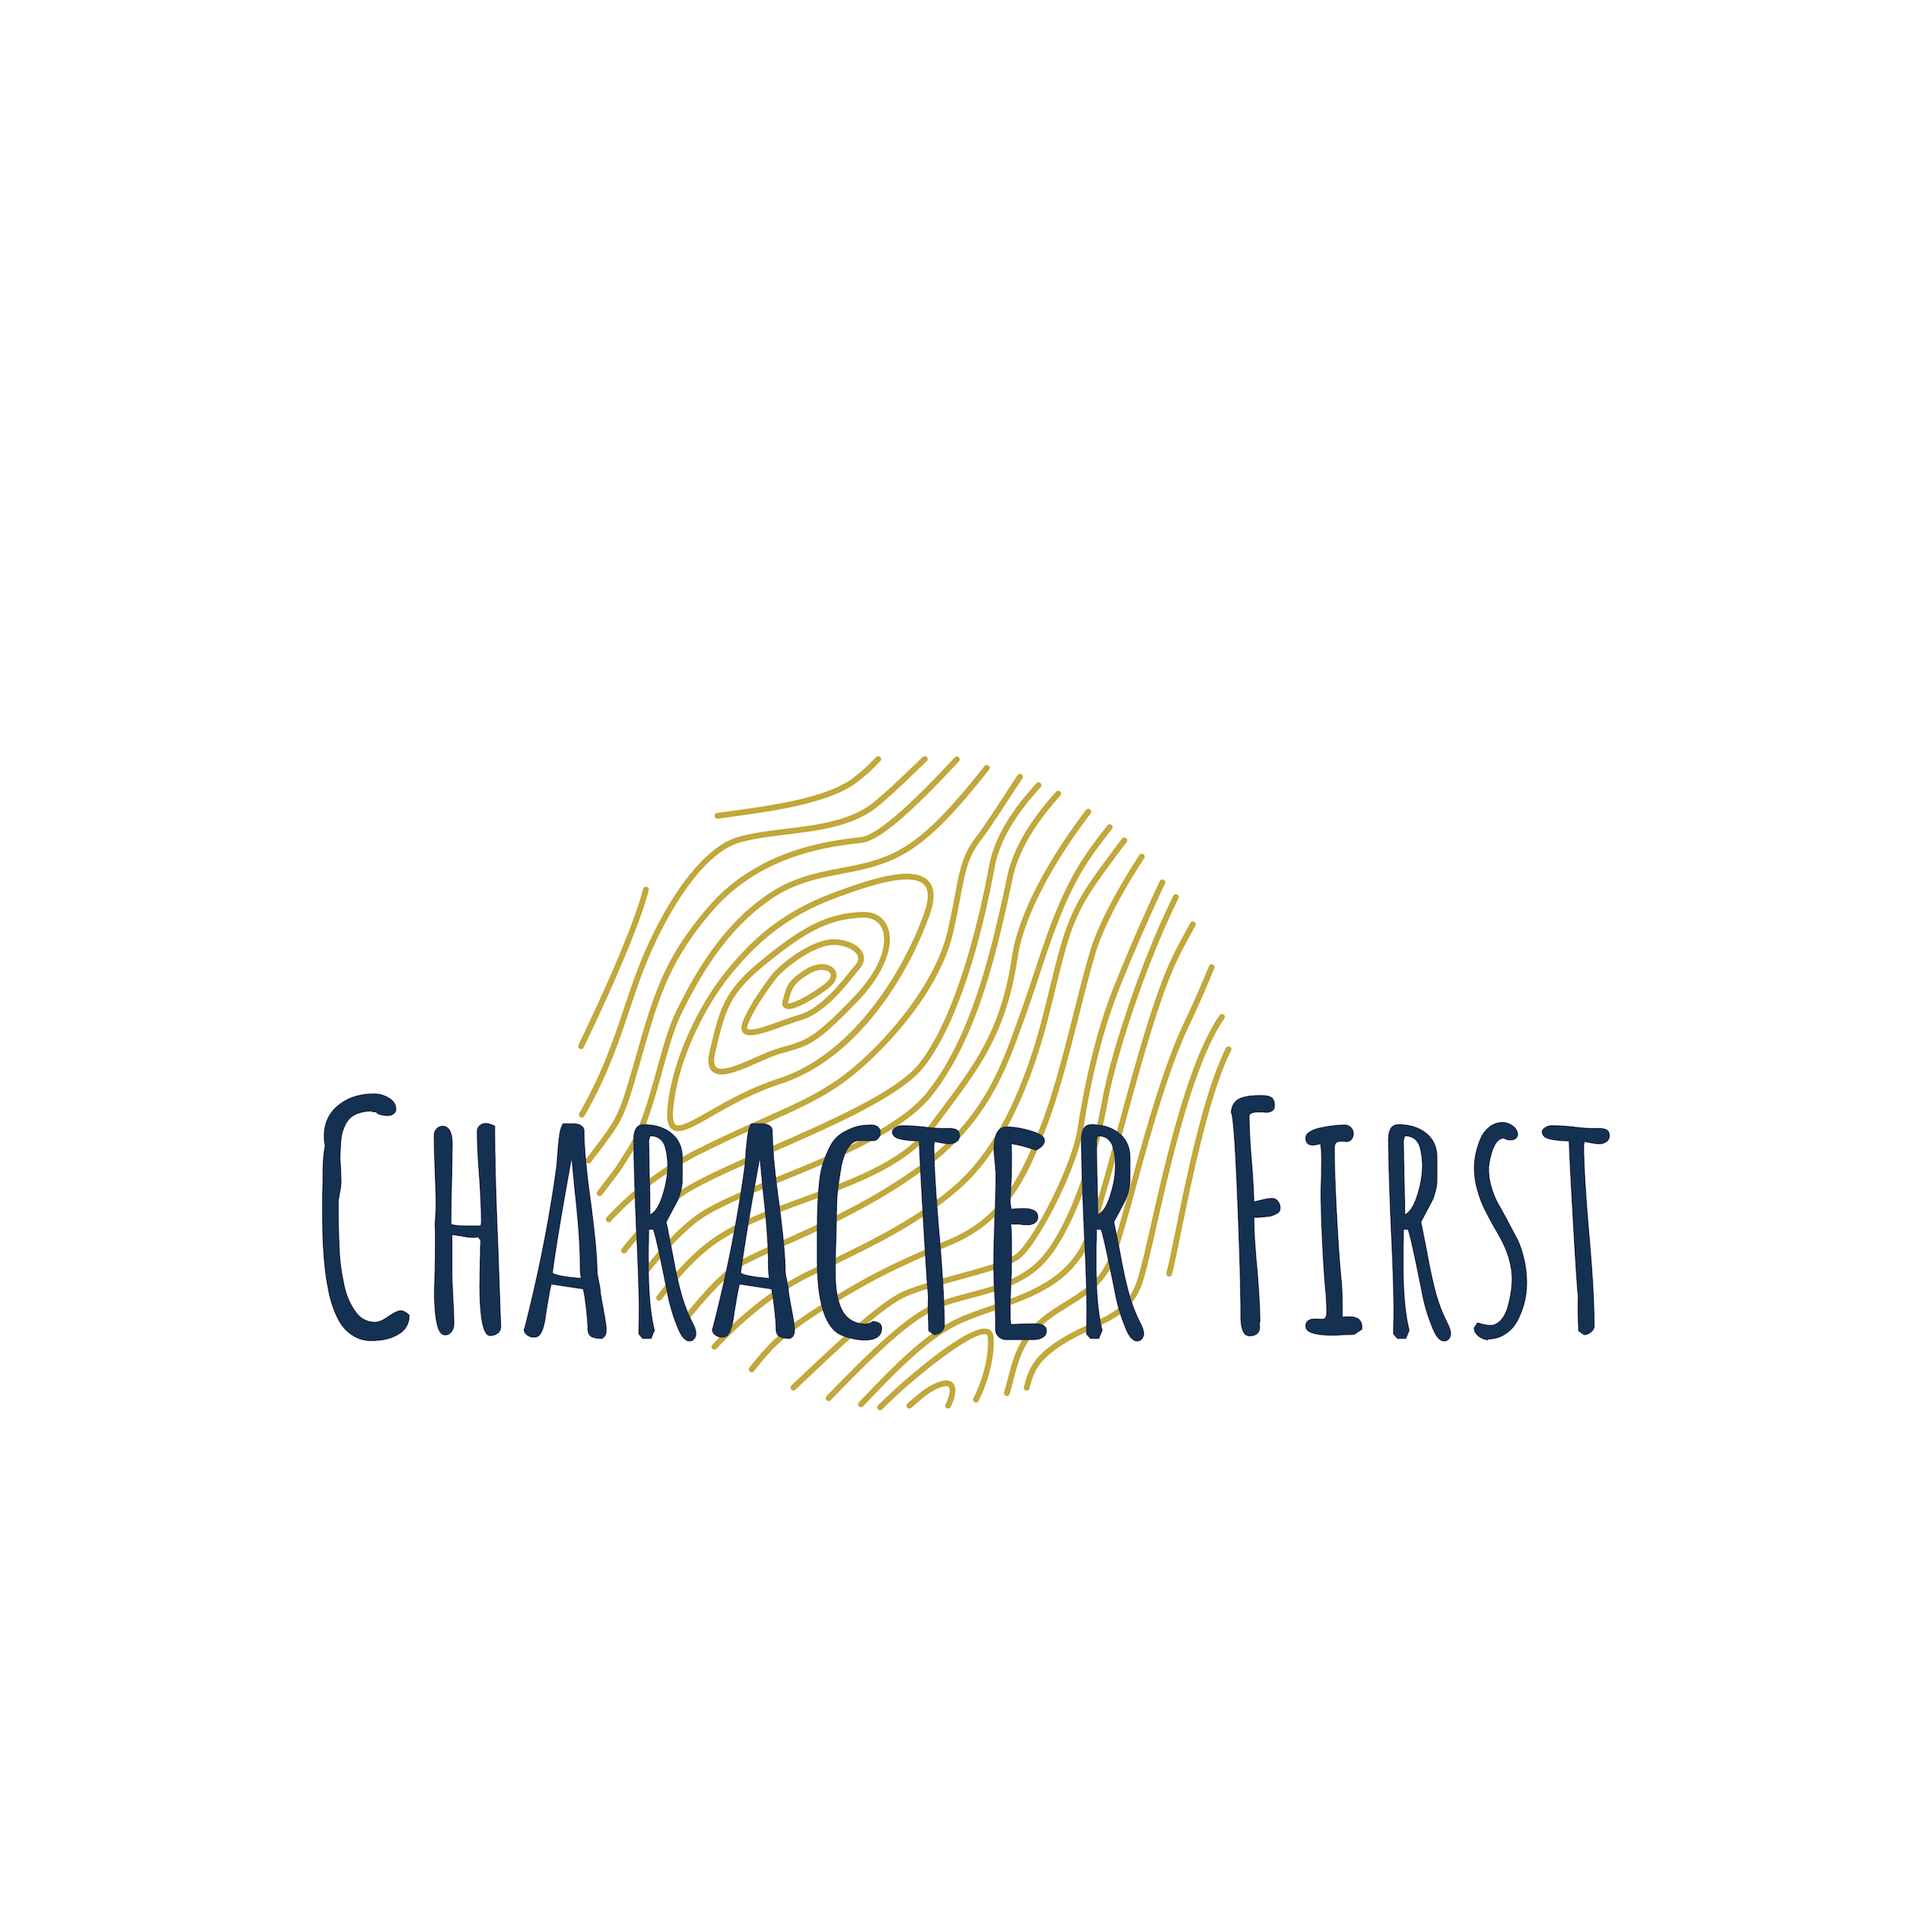 Welcome to Character First